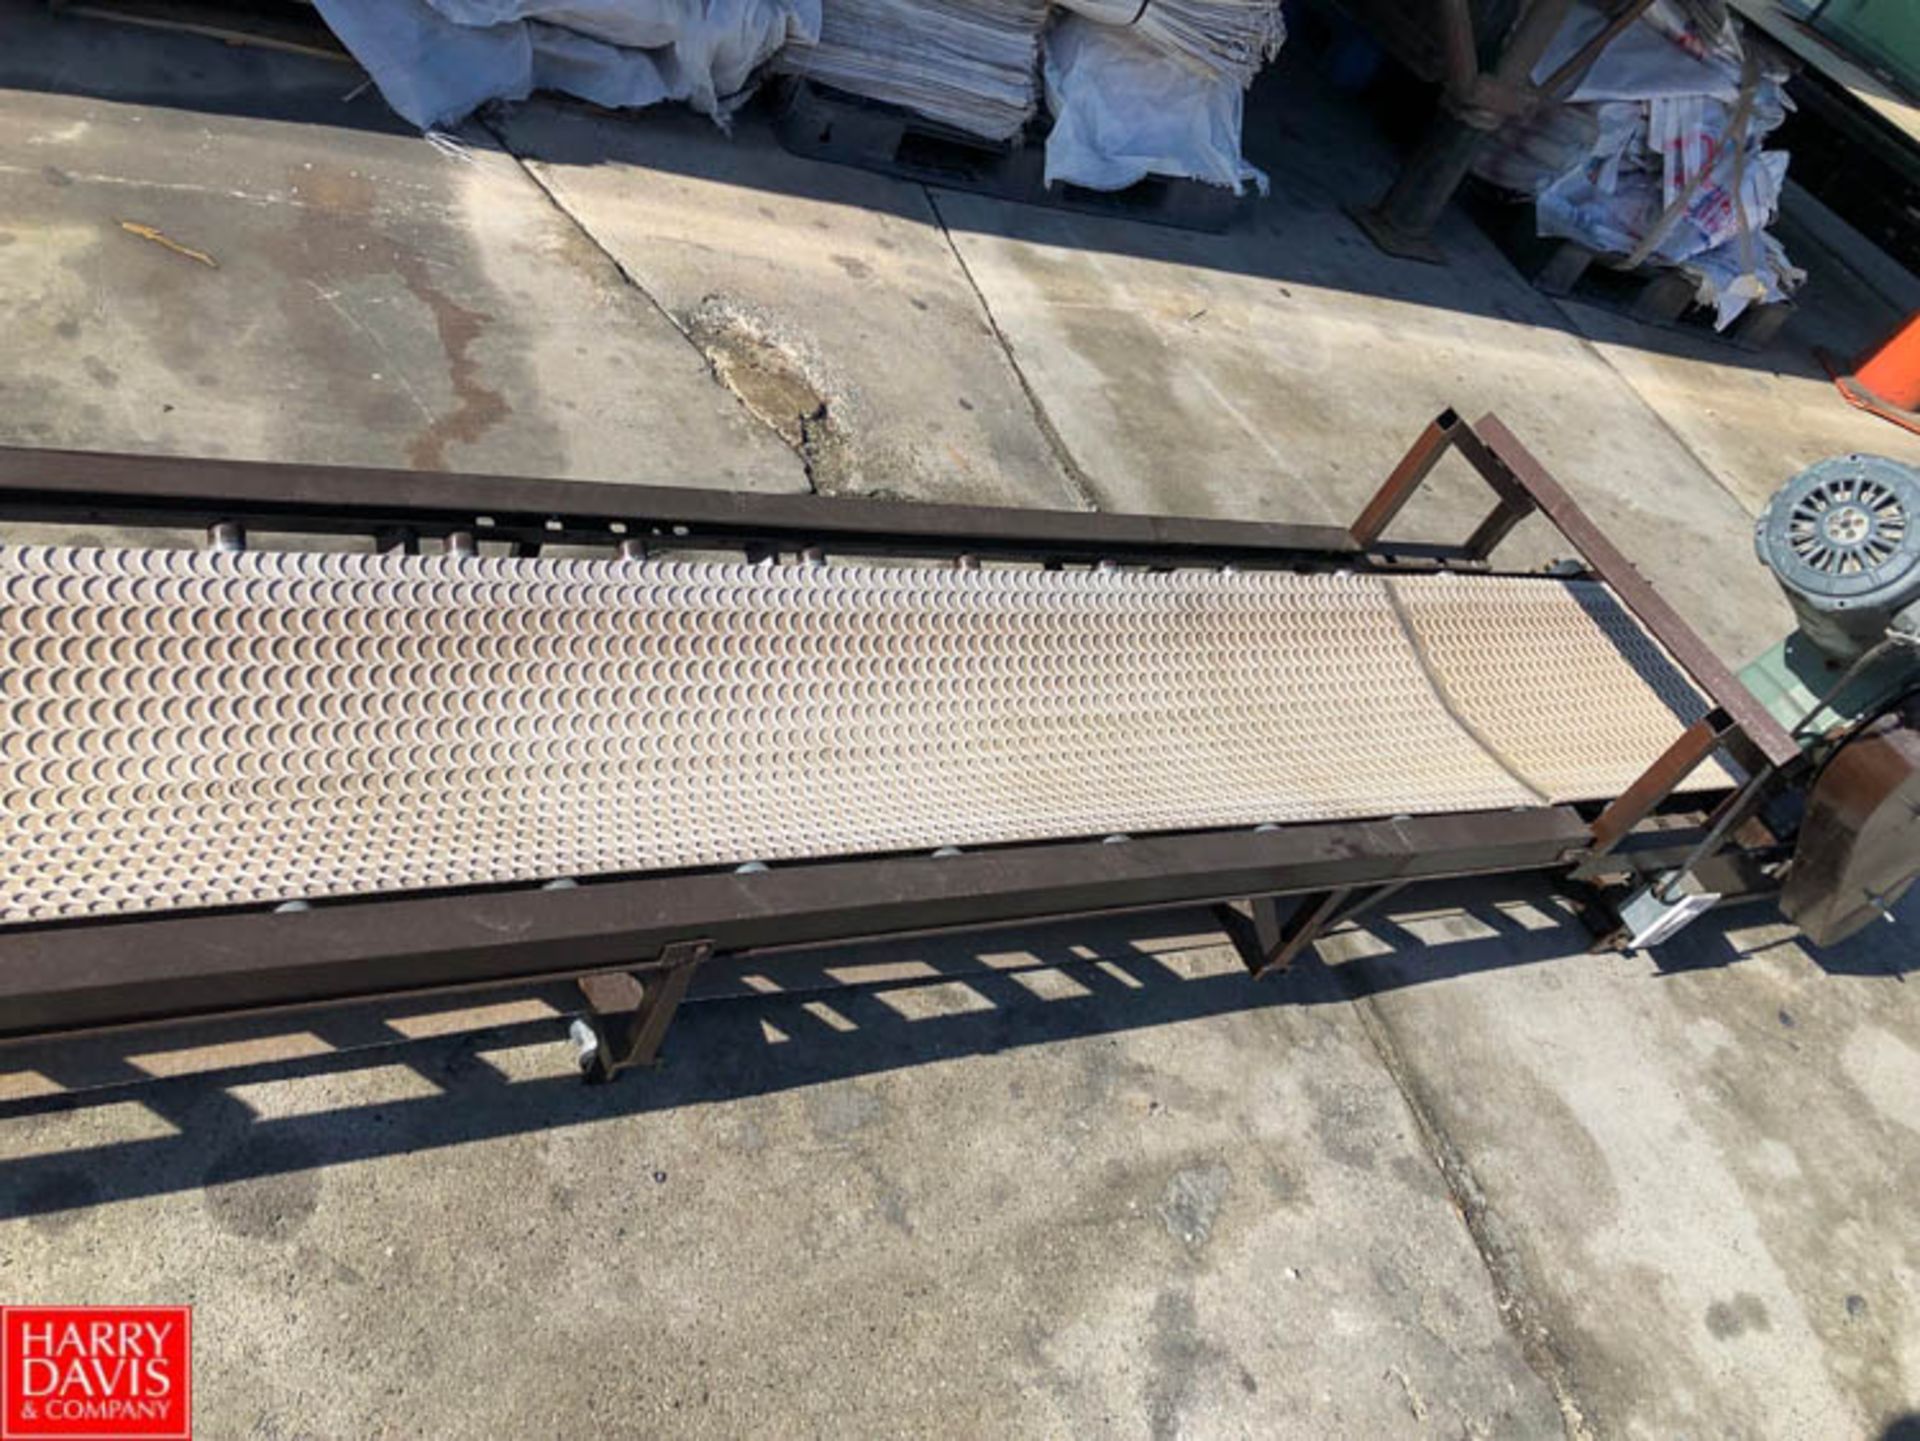 18' Length Concave Feed Conveyor, 18" Width, with Conveyor Drive **SUBJECT TO BULK BIDDING** - Image 2 of 3